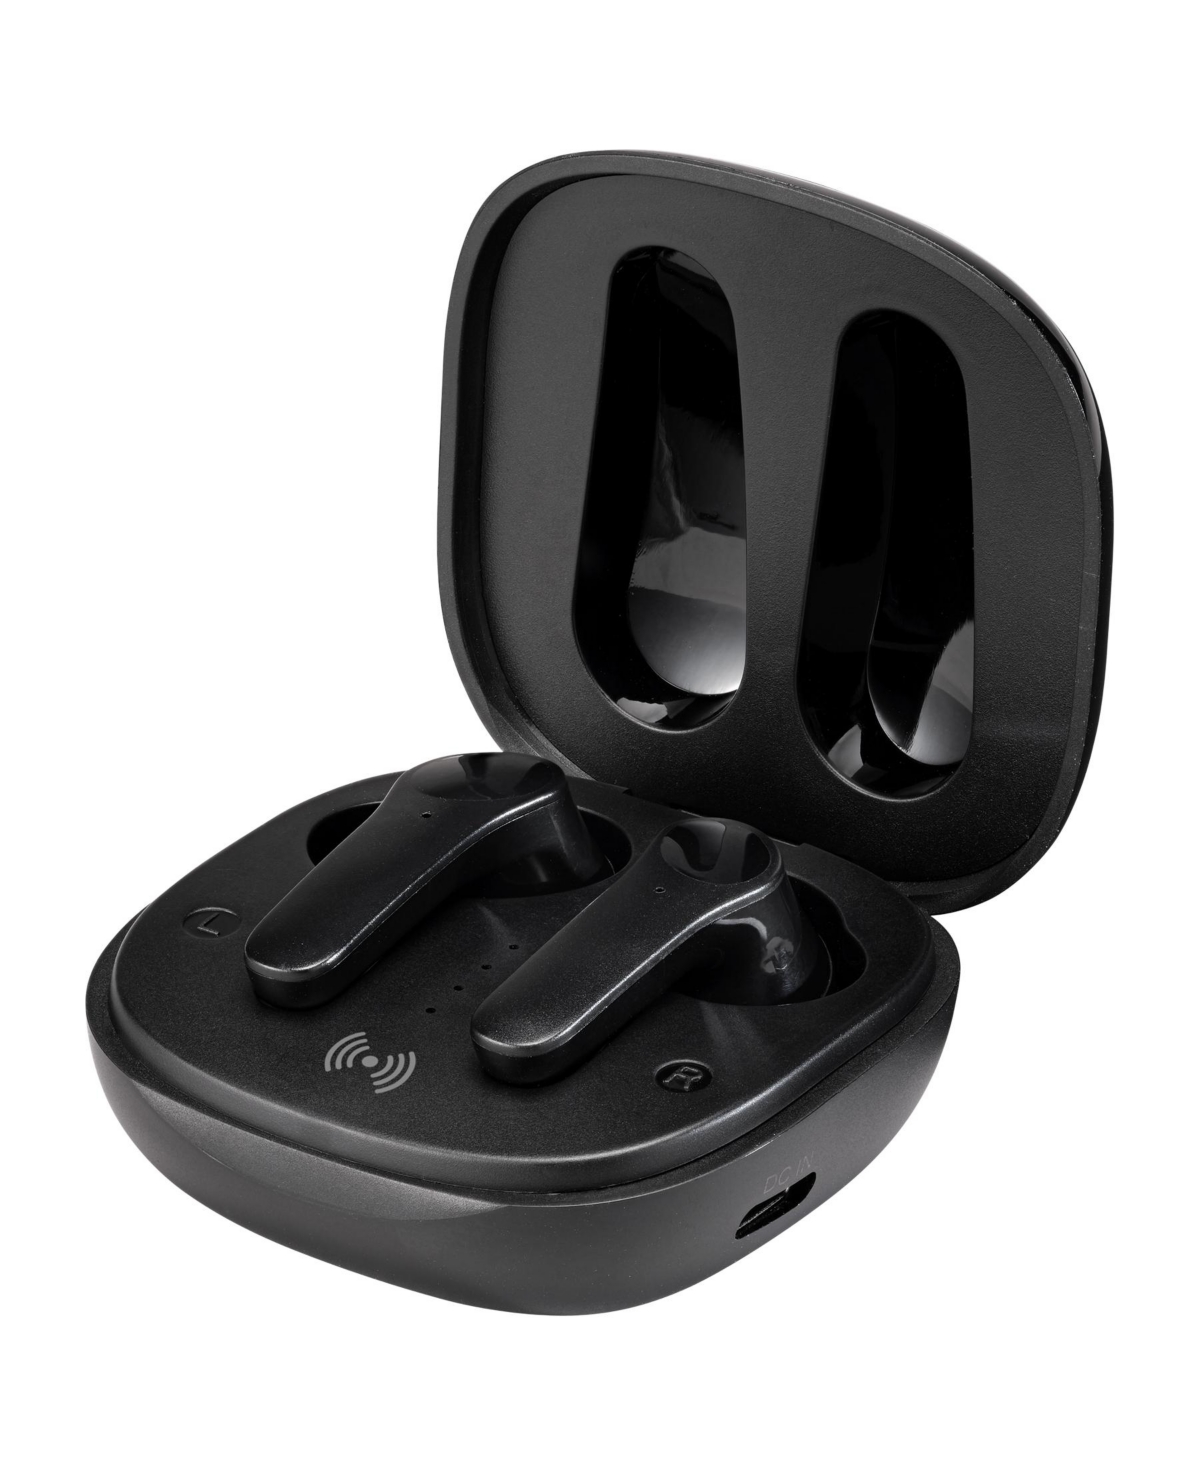 Ilive Truly Wireless Active Noise Canceling Ear Buds With Charging Case, 2.28" X 2.28" In Black